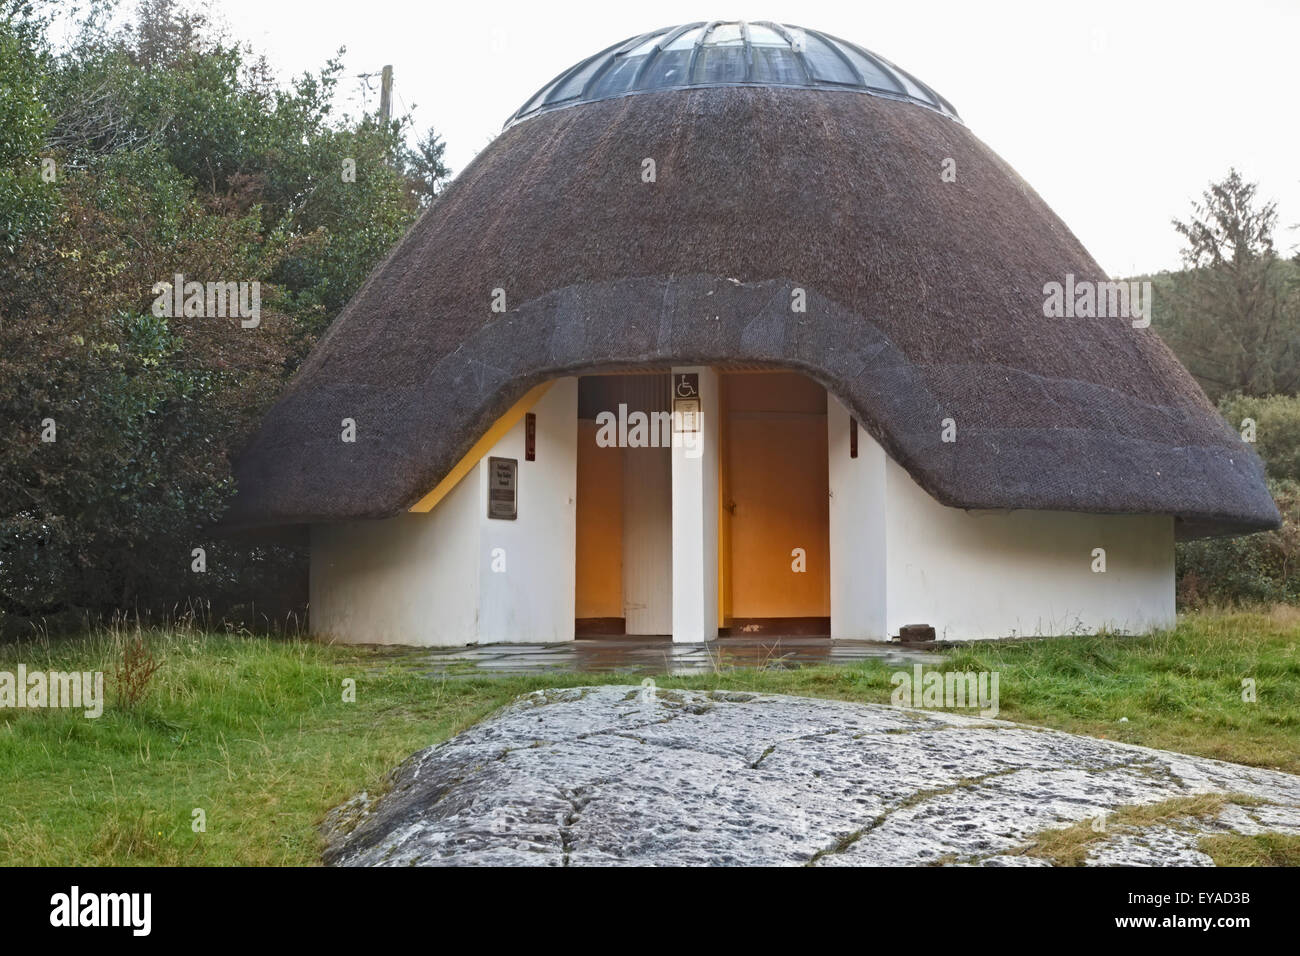 thatched-roof-public-toilet-facilities-i